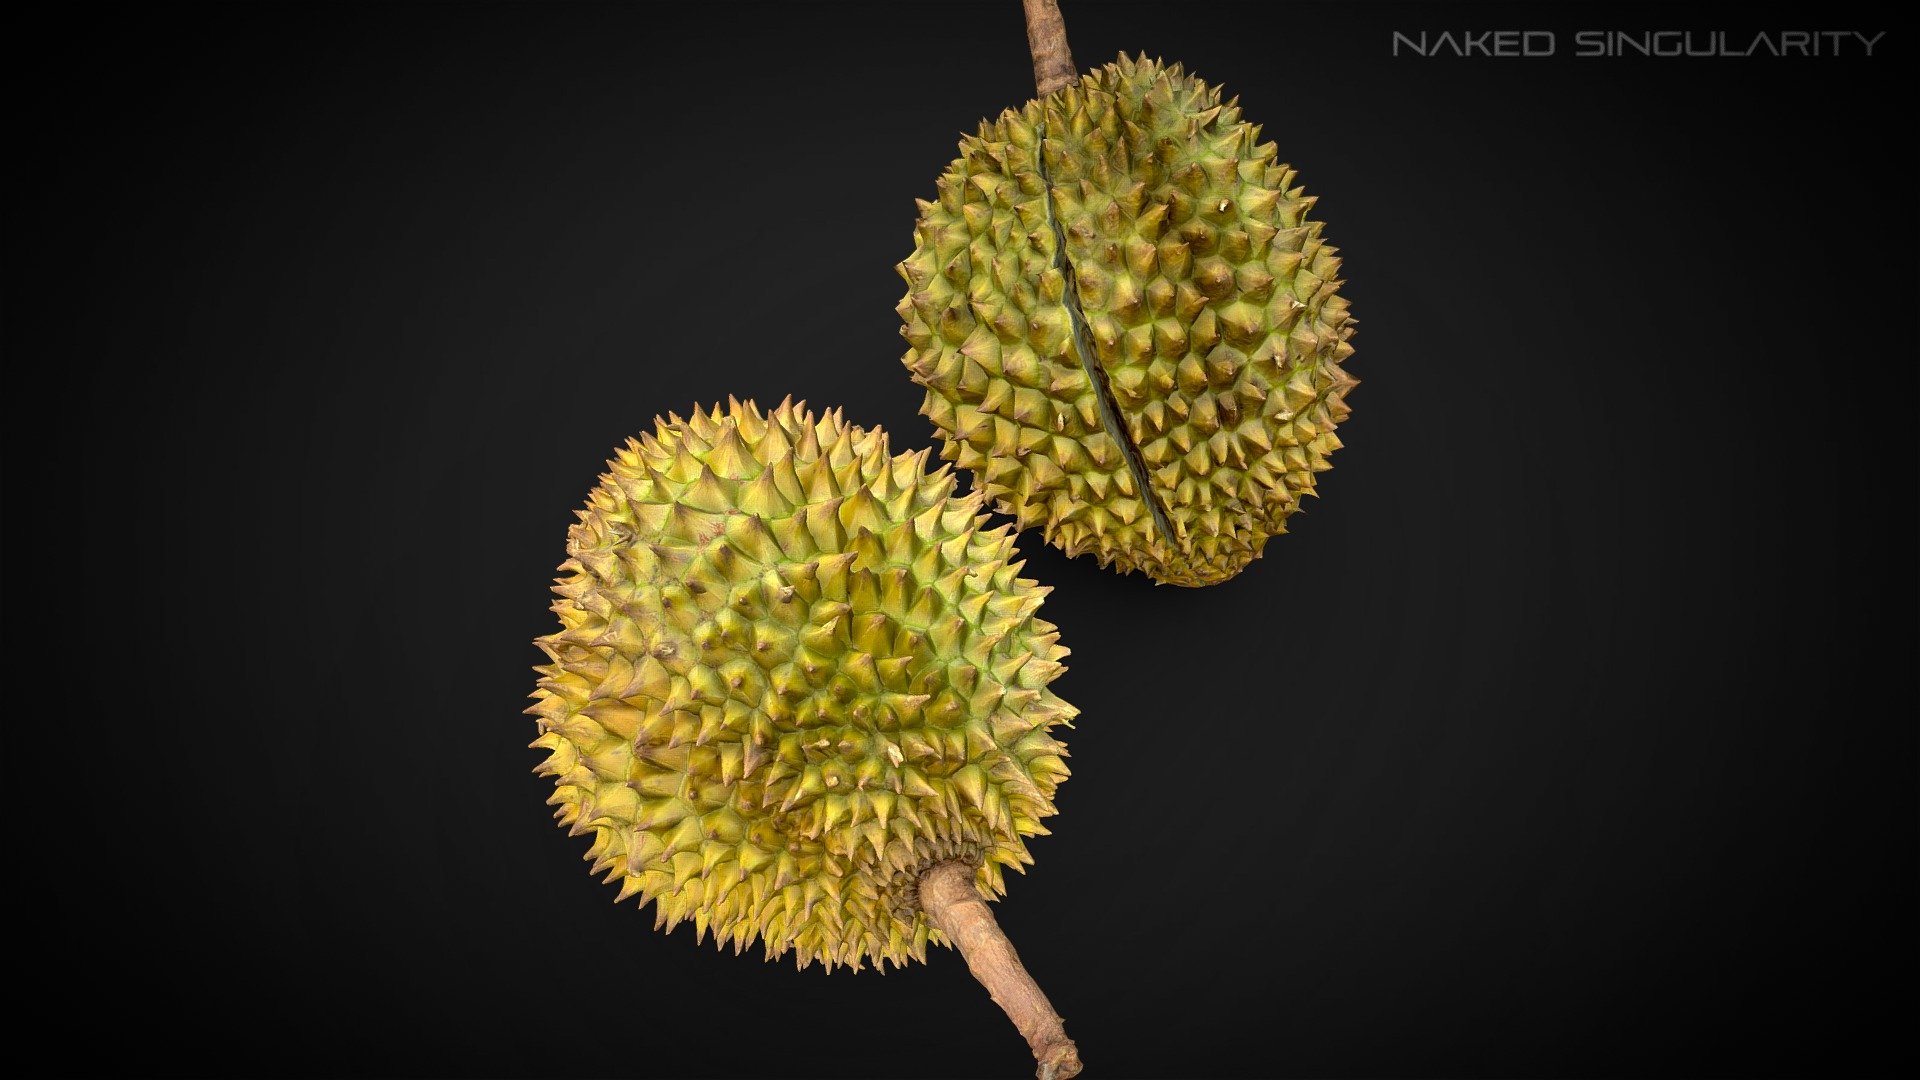 3D Scan fruit - Durian photogrammetry 4K




High quality 3d scan / photogrammetry of a Durian (fruit).

4K Textures.

Include mid poly (17k tris) and high poly (358k tris) version.

Models have UV channel 2 unwrapped for lightmap in Unity and Unreal Engine.

Check out other fruit models here

Customer support: nakedsingularity.studio@gmail.com

Youtube

Facebook - 3D Scan fruit - Durian photogrammetry 4K - Buy Royalty Free 3D model by Naked Singularity Studio (@nakedsingularity) 3d model